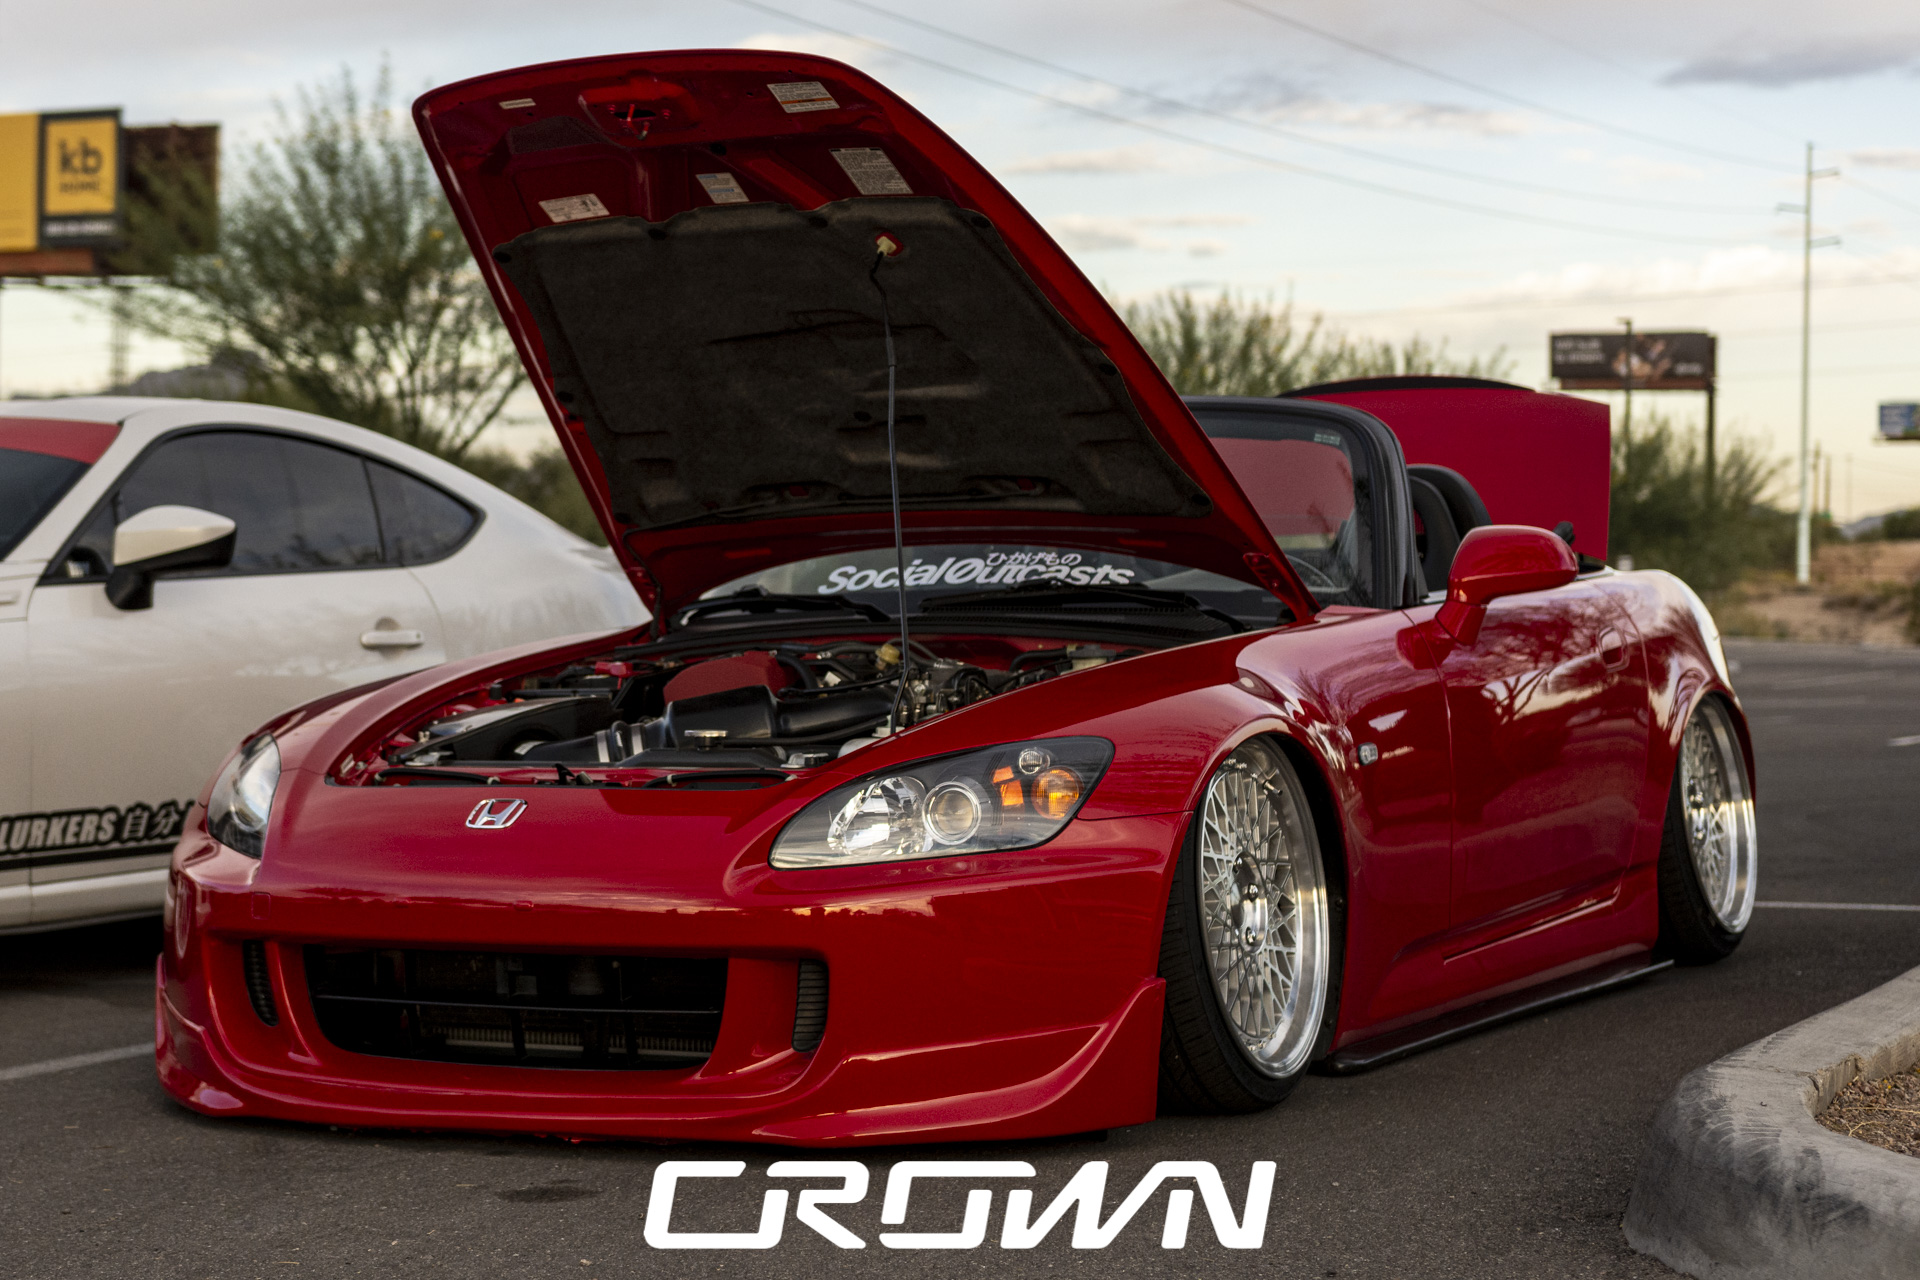 Red Modified Honda S2000 at Cars And Coffee and Clubs Tucson Arizona